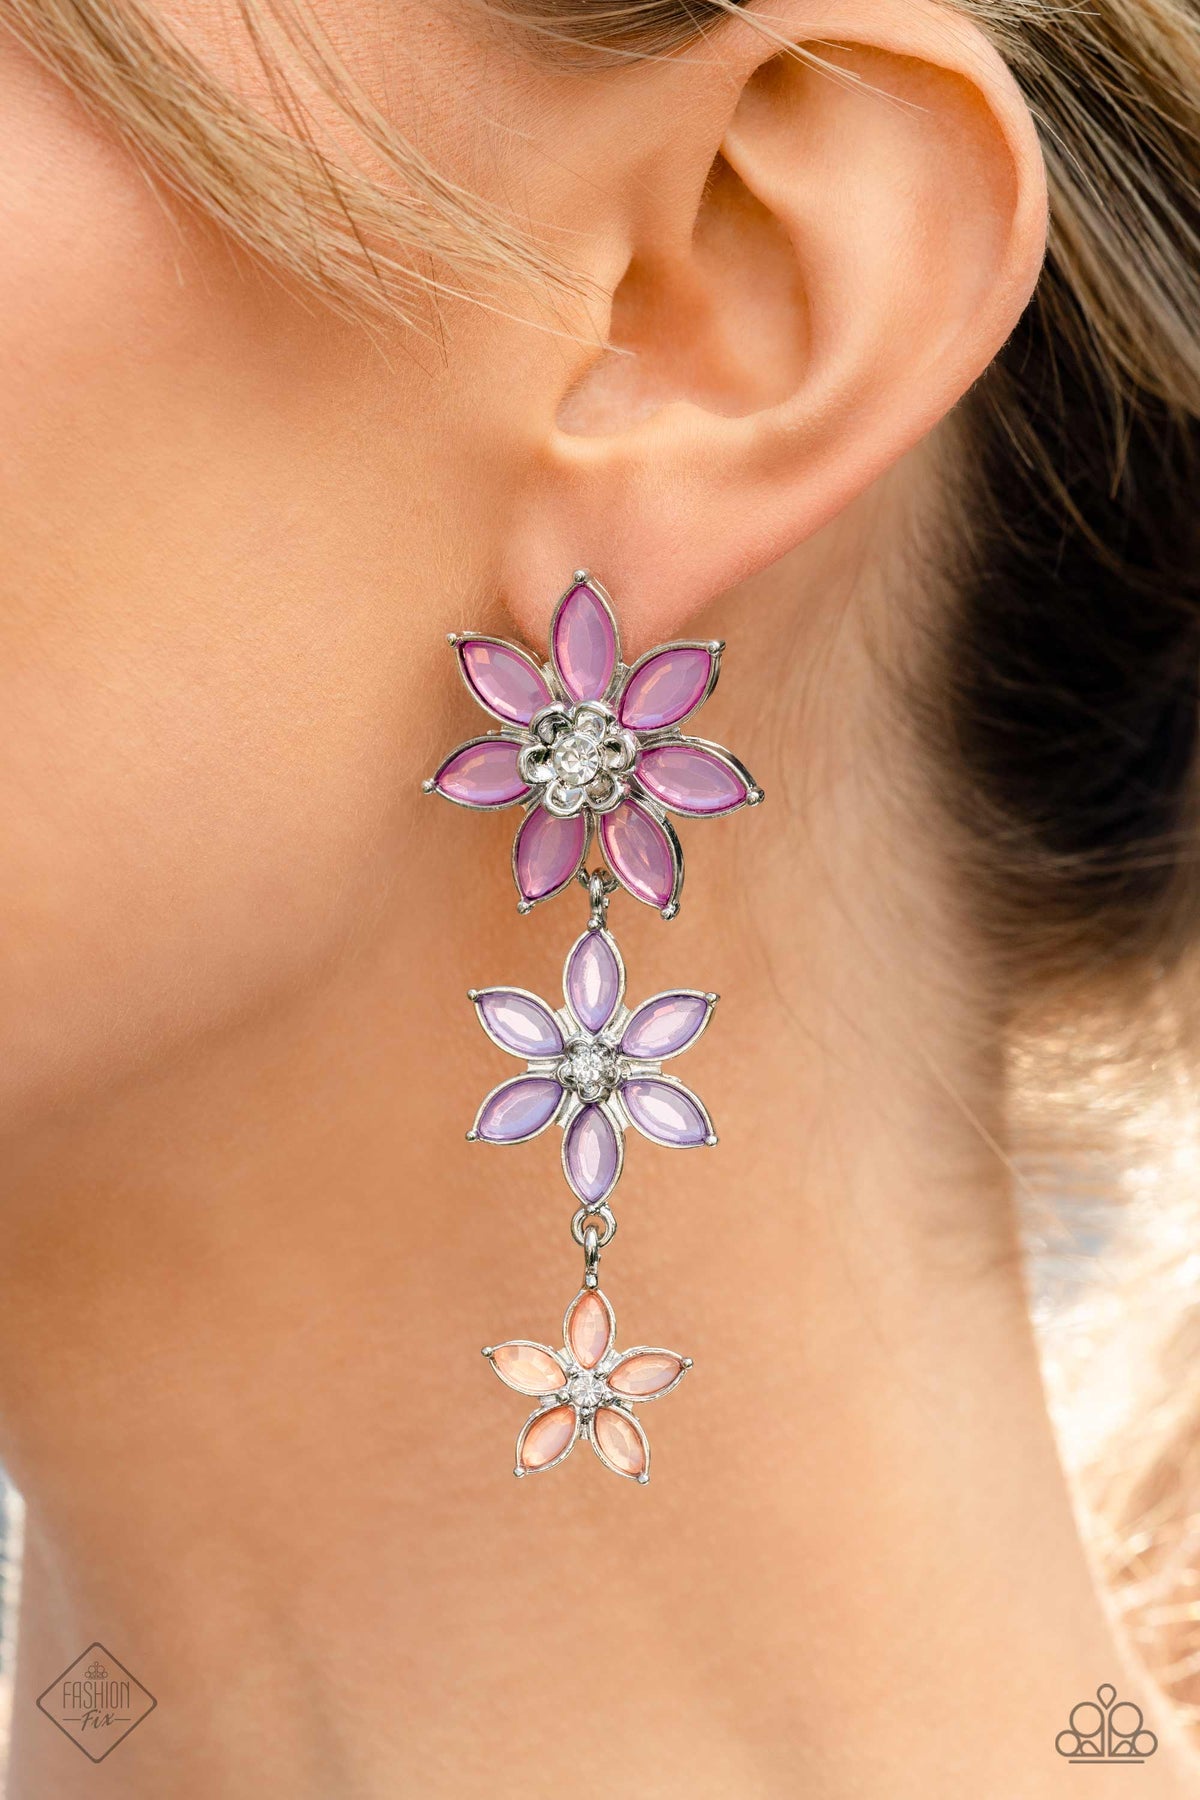 Lets Get it GARLAND Multi Flower Earrings - Paparazzi Accessories-on model - CarasShop.com - $5 Jewelry by Cara Jewels